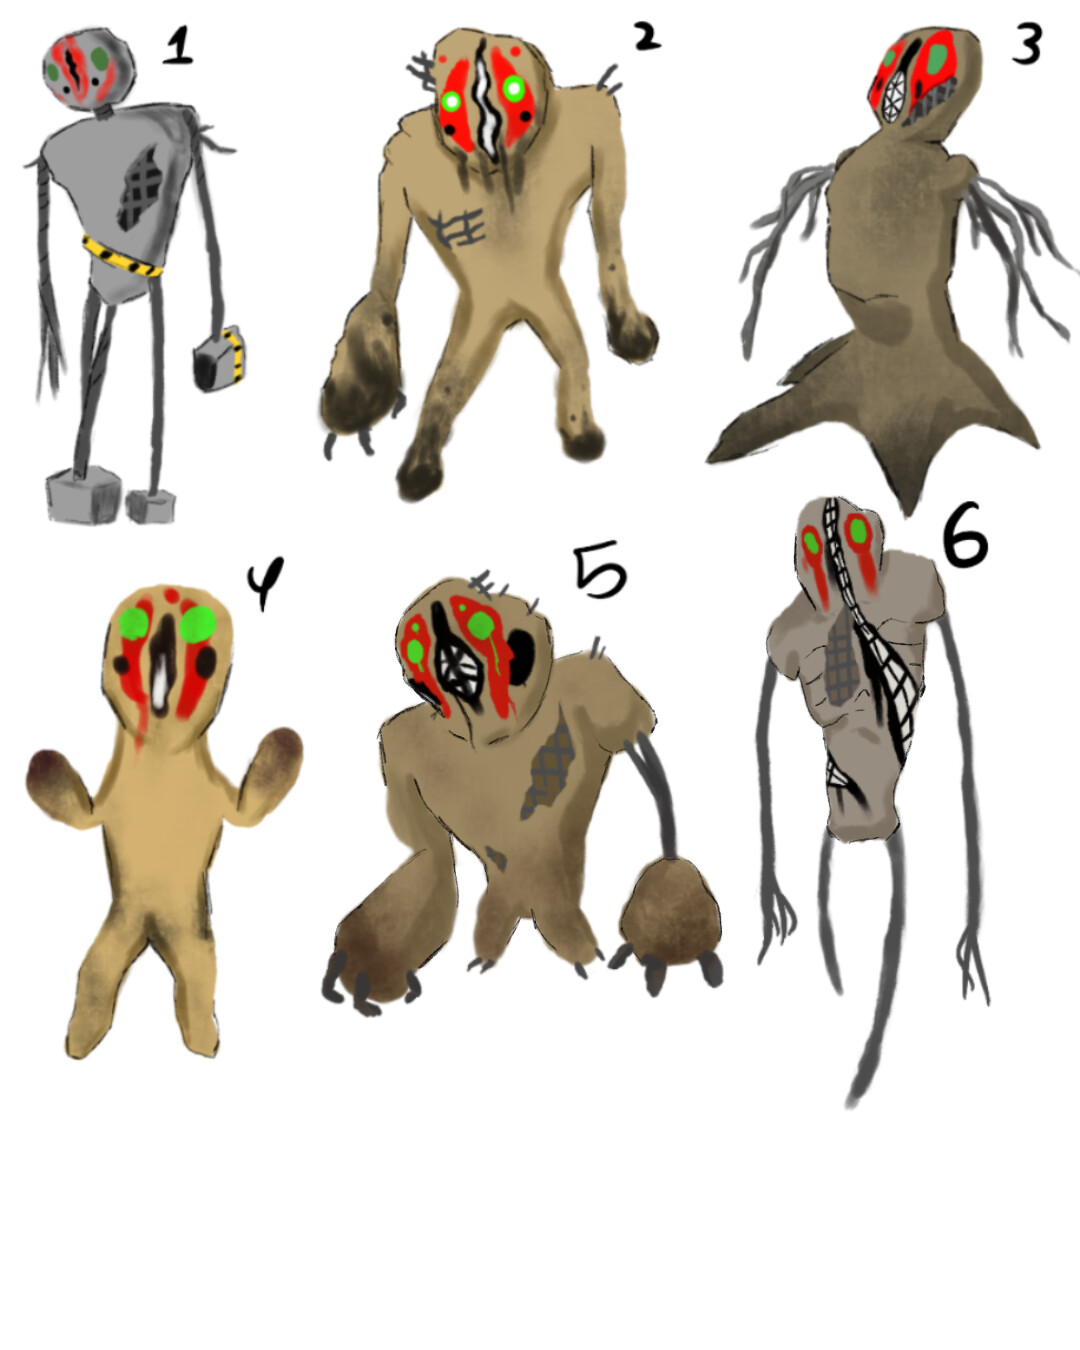 All of the SCP-173 redesigns I have seen lean on gritty, broken